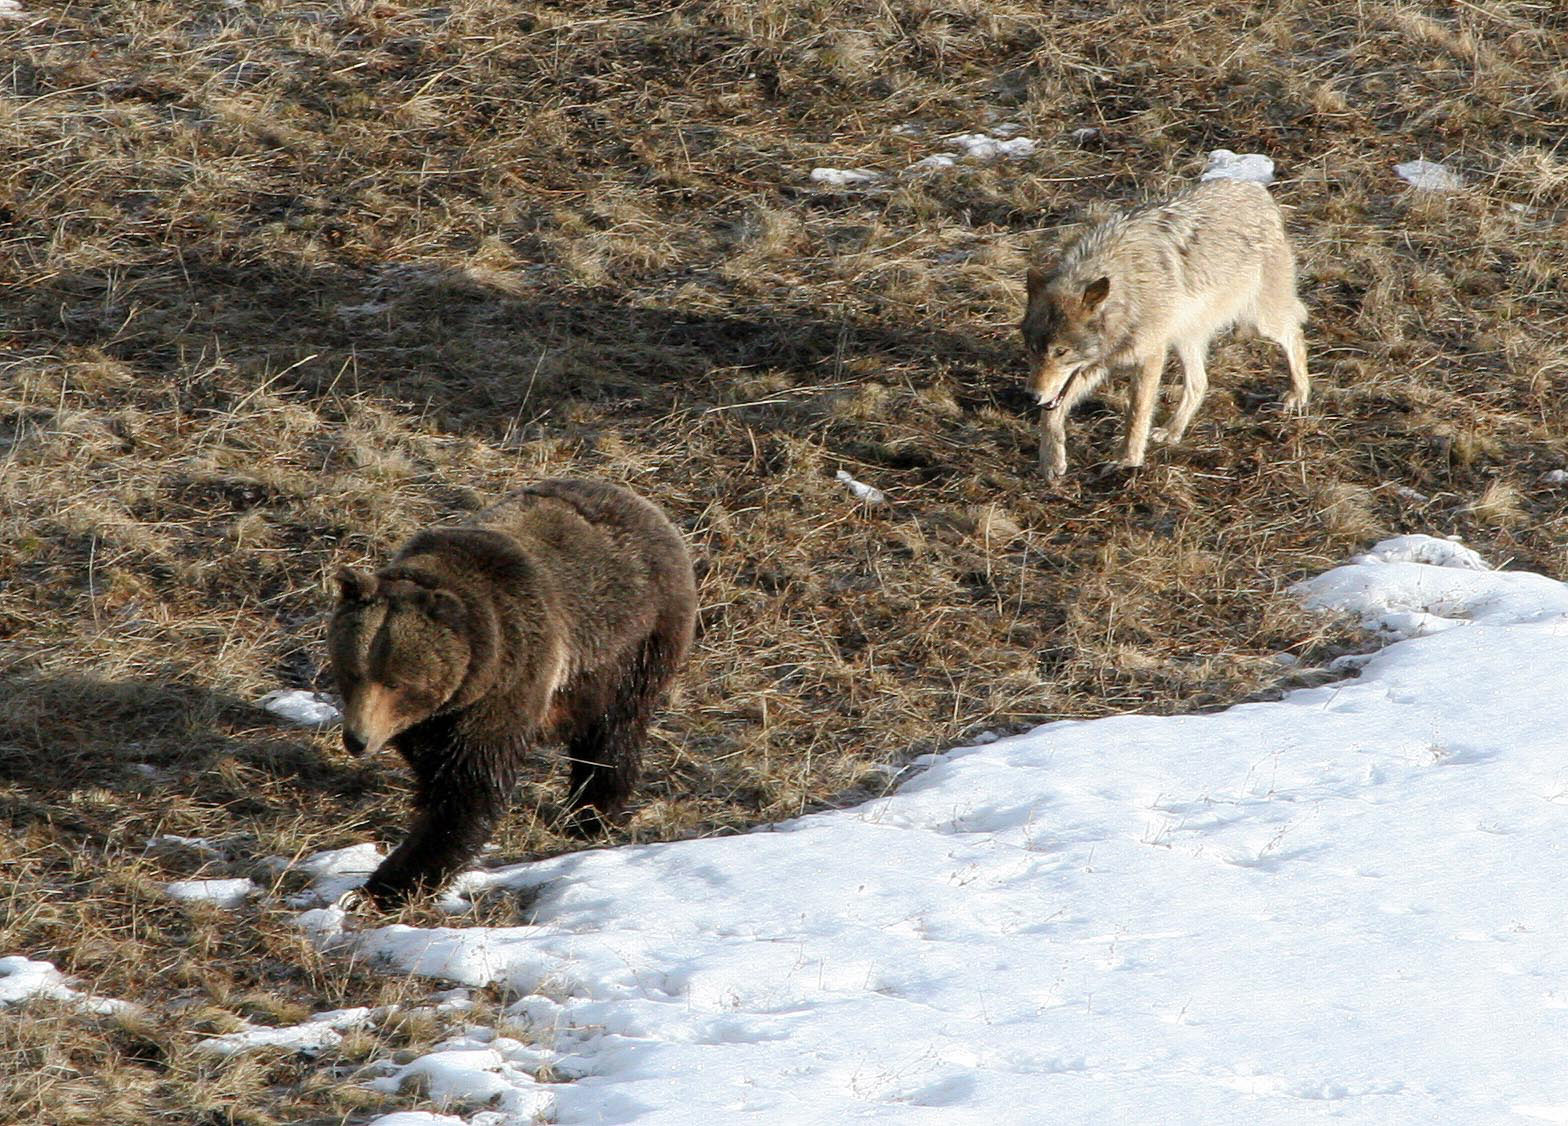 A gray wolf and a grizzly bear in Yellowstone National Park.